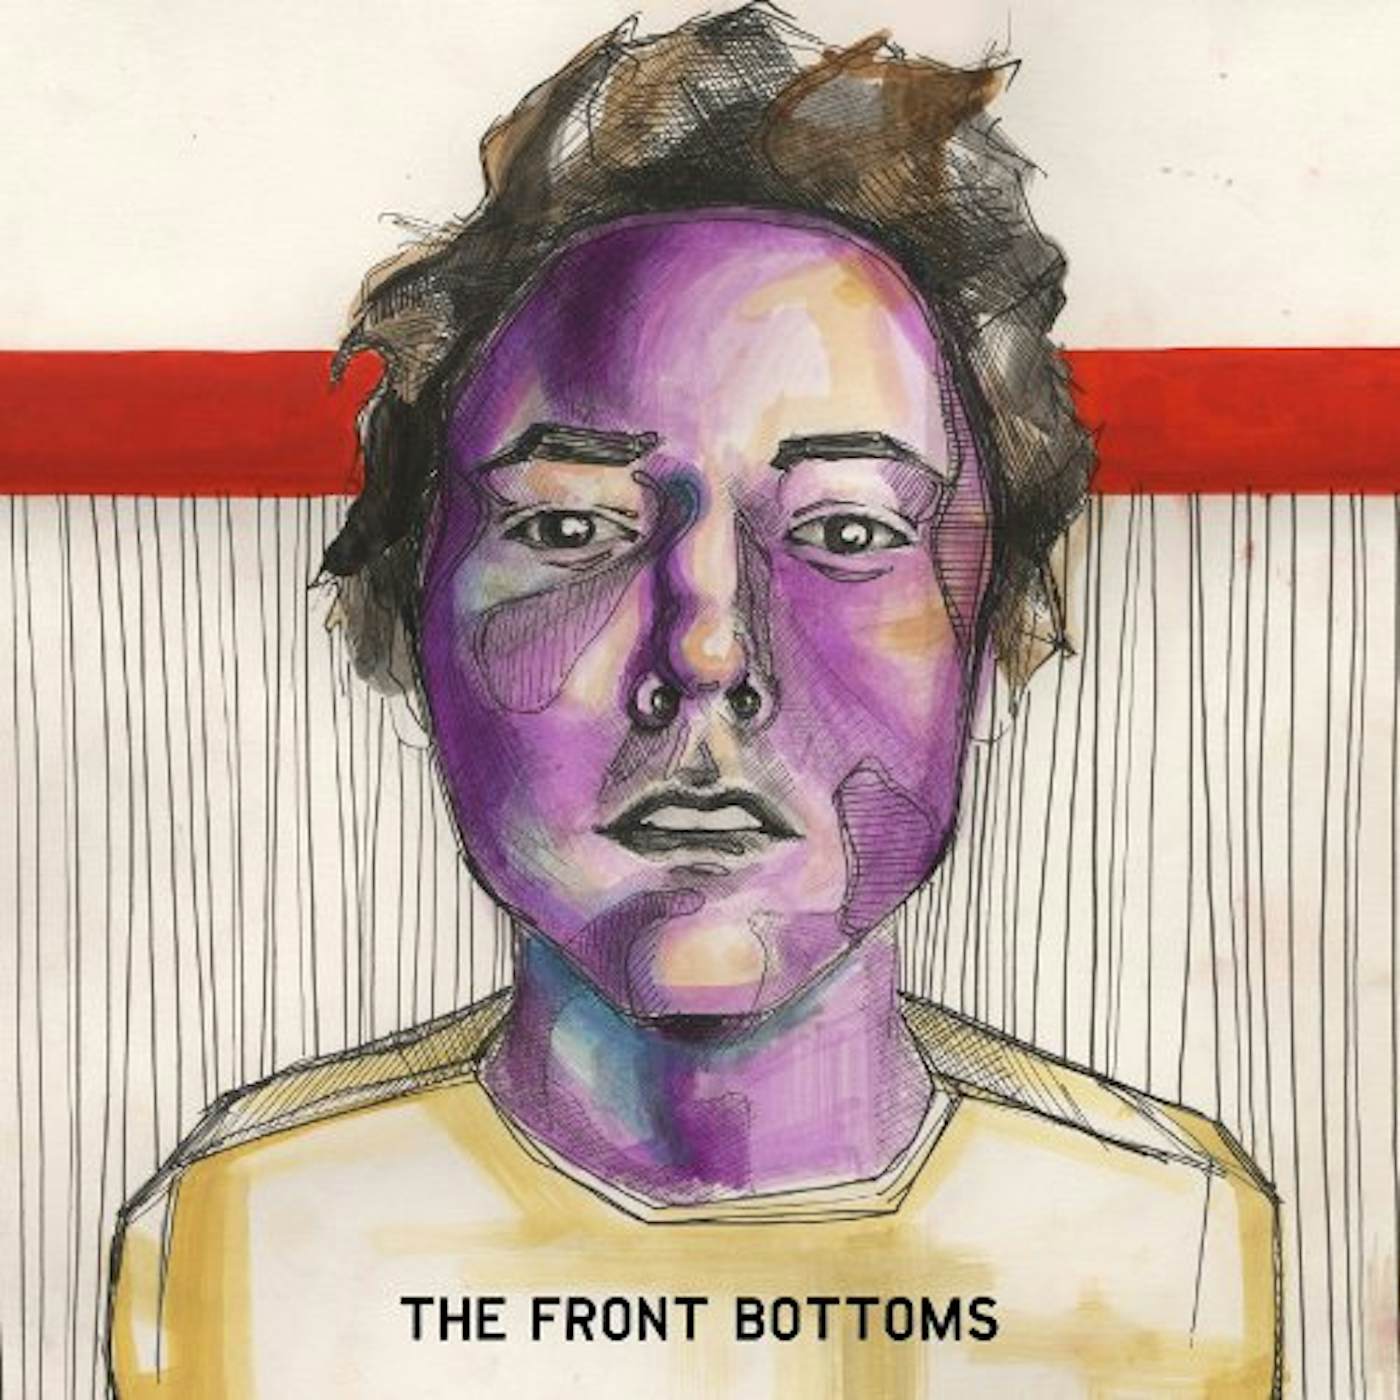  The Front Bottoms S/T Vinyl Record